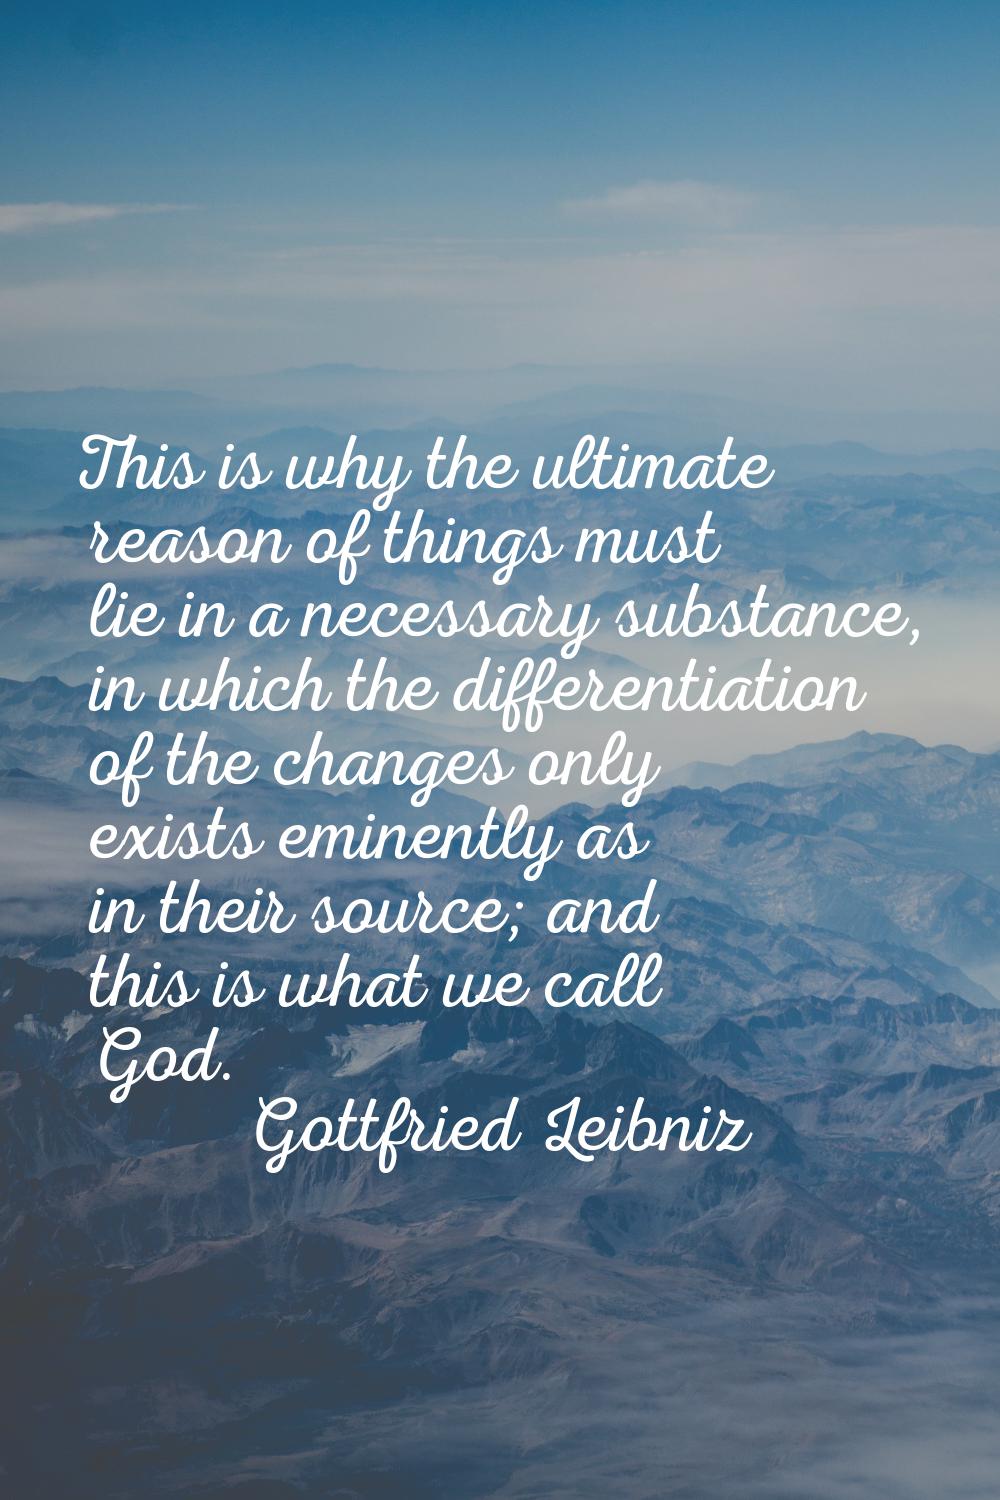 This is why the ultimate reason of things must lie in a necessary substance, in which the different